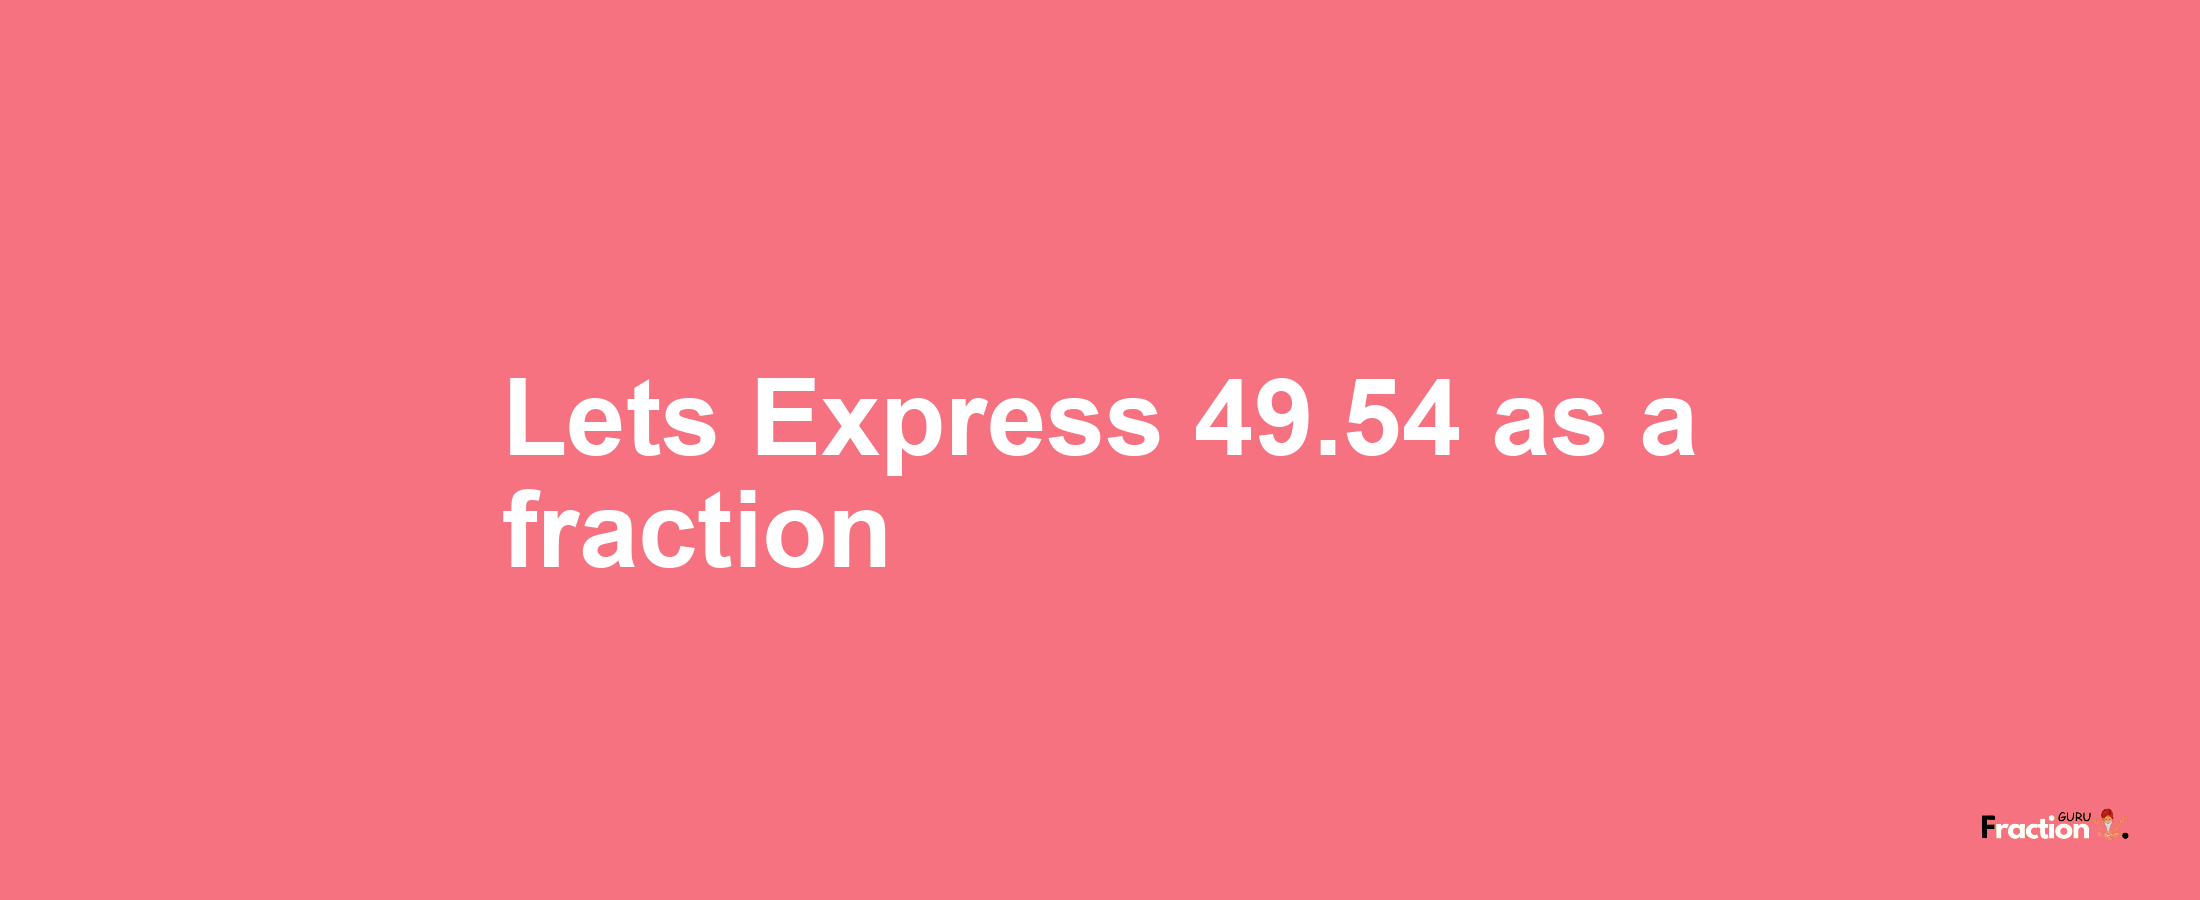 Lets Express 49.54 as afraction